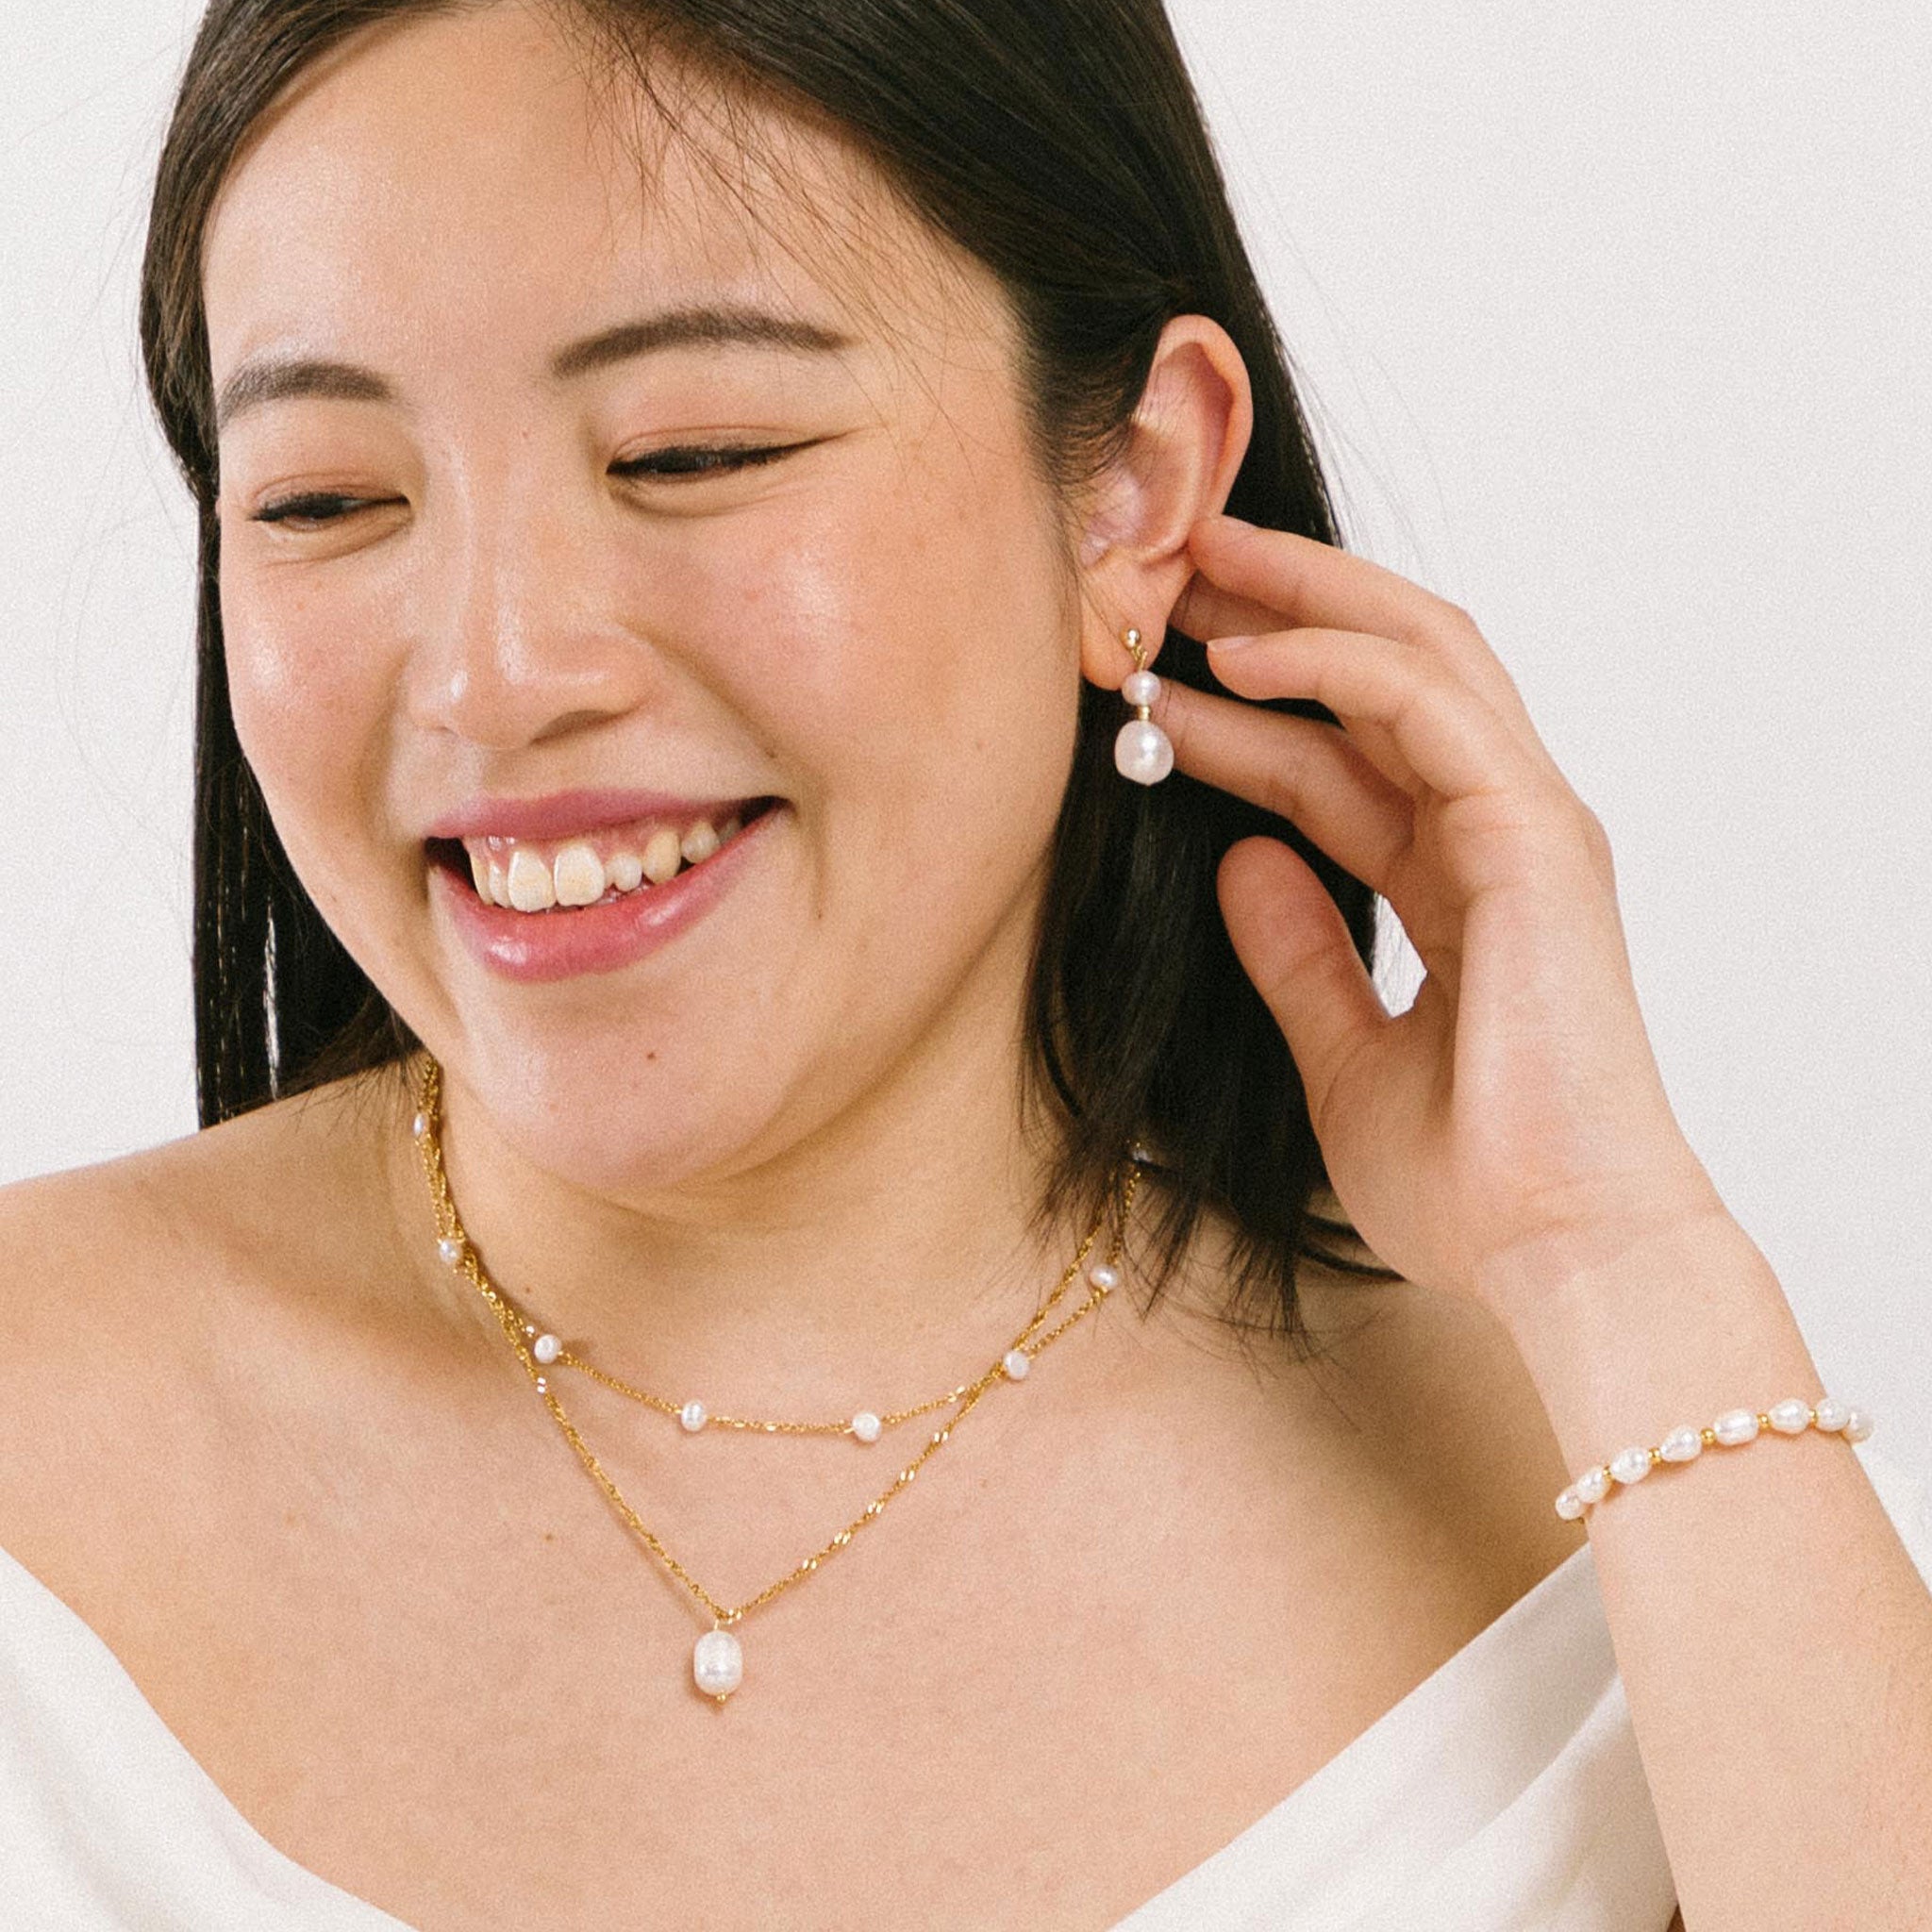 A model wearing the Elena Pearl Necklace is adjustable and crafted from Freshwater Pearls, 18K Gold Plated Stainless Steel, and is waterproof and hypoallergenic. Each pearl may vary slightly in size and colour due to its natural characteristics.